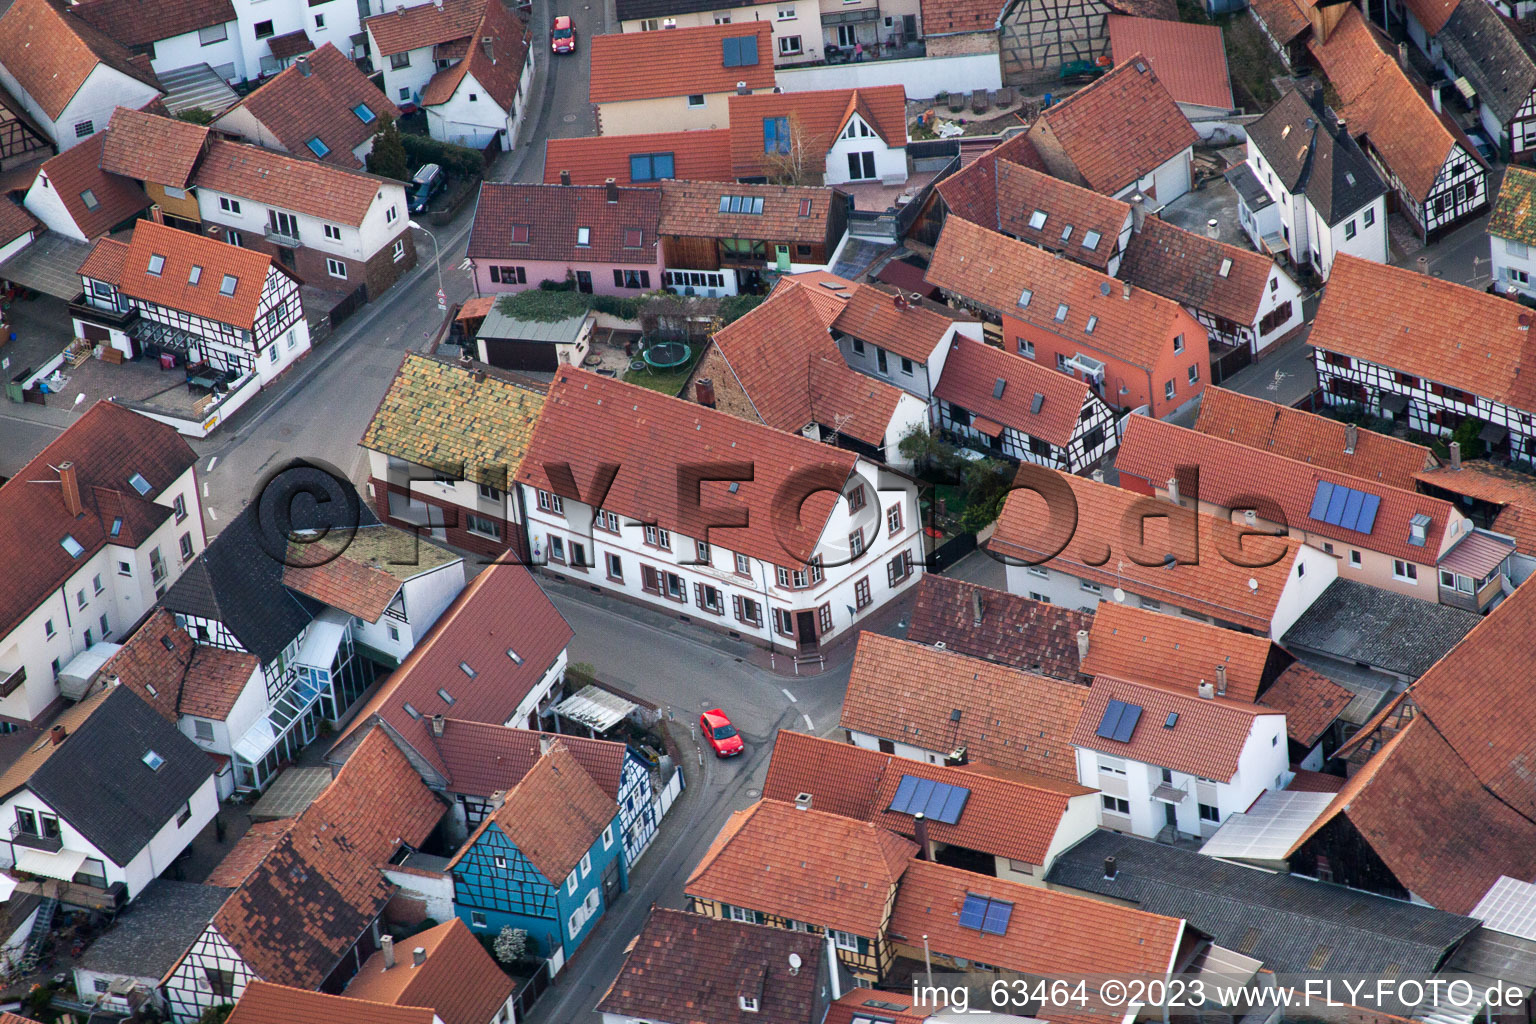 Aerial view of Jockgrim in the state Rhineland-Palatinate, Germany